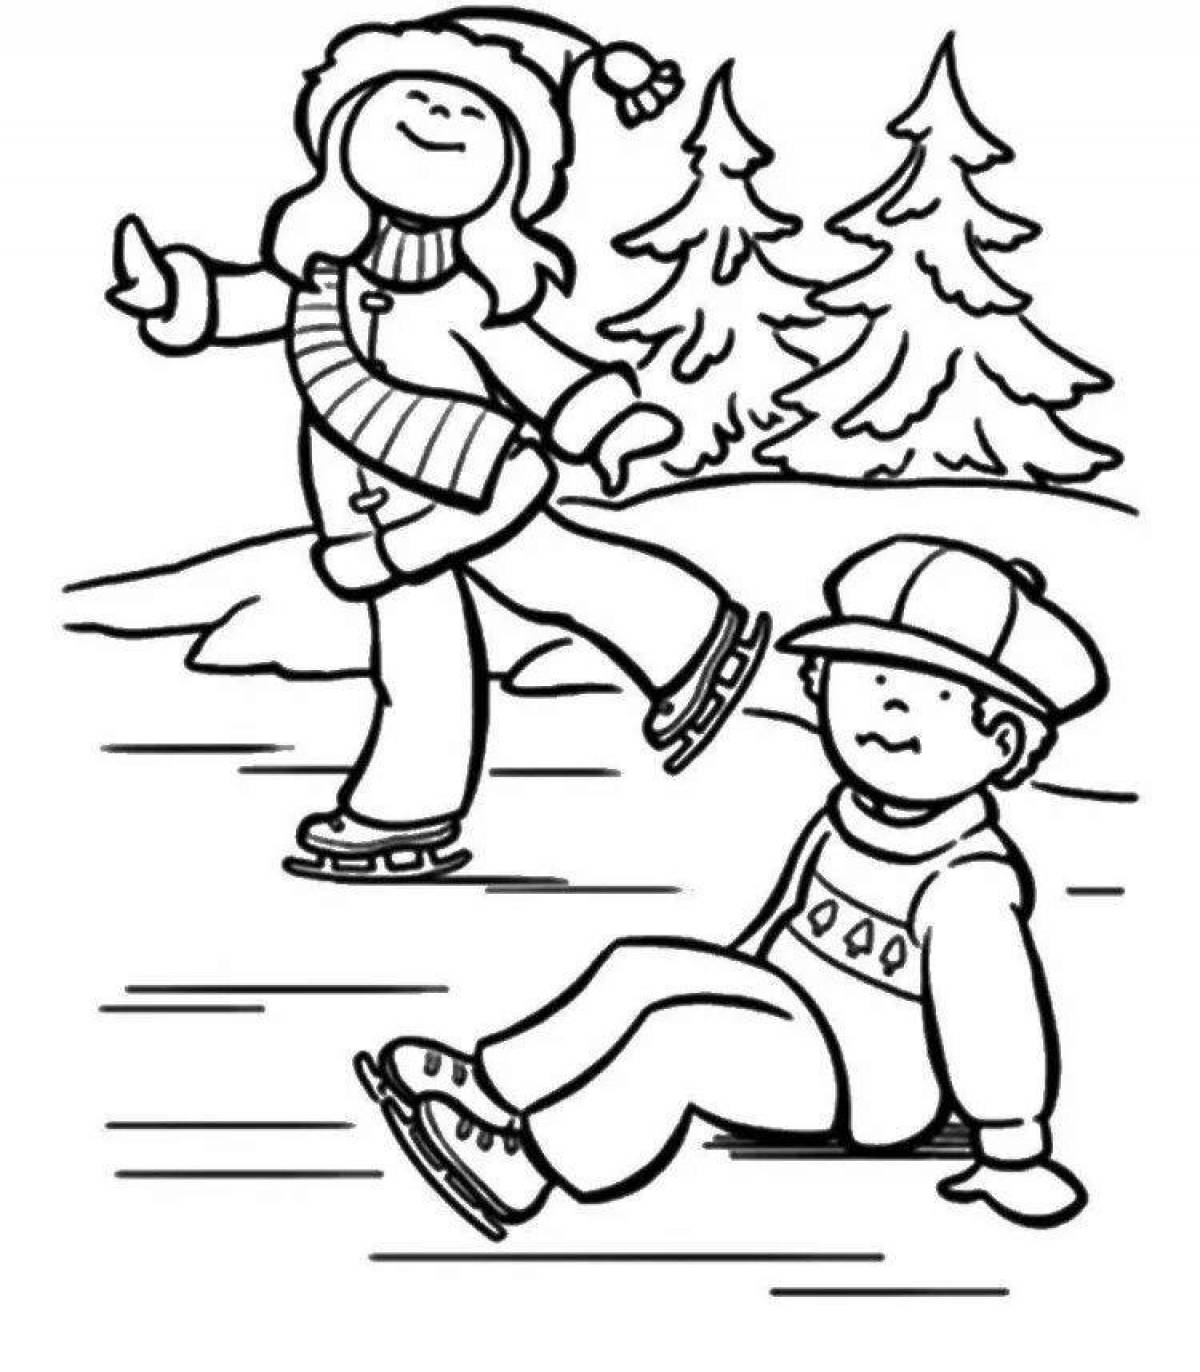 Attractive ice safety coloring page